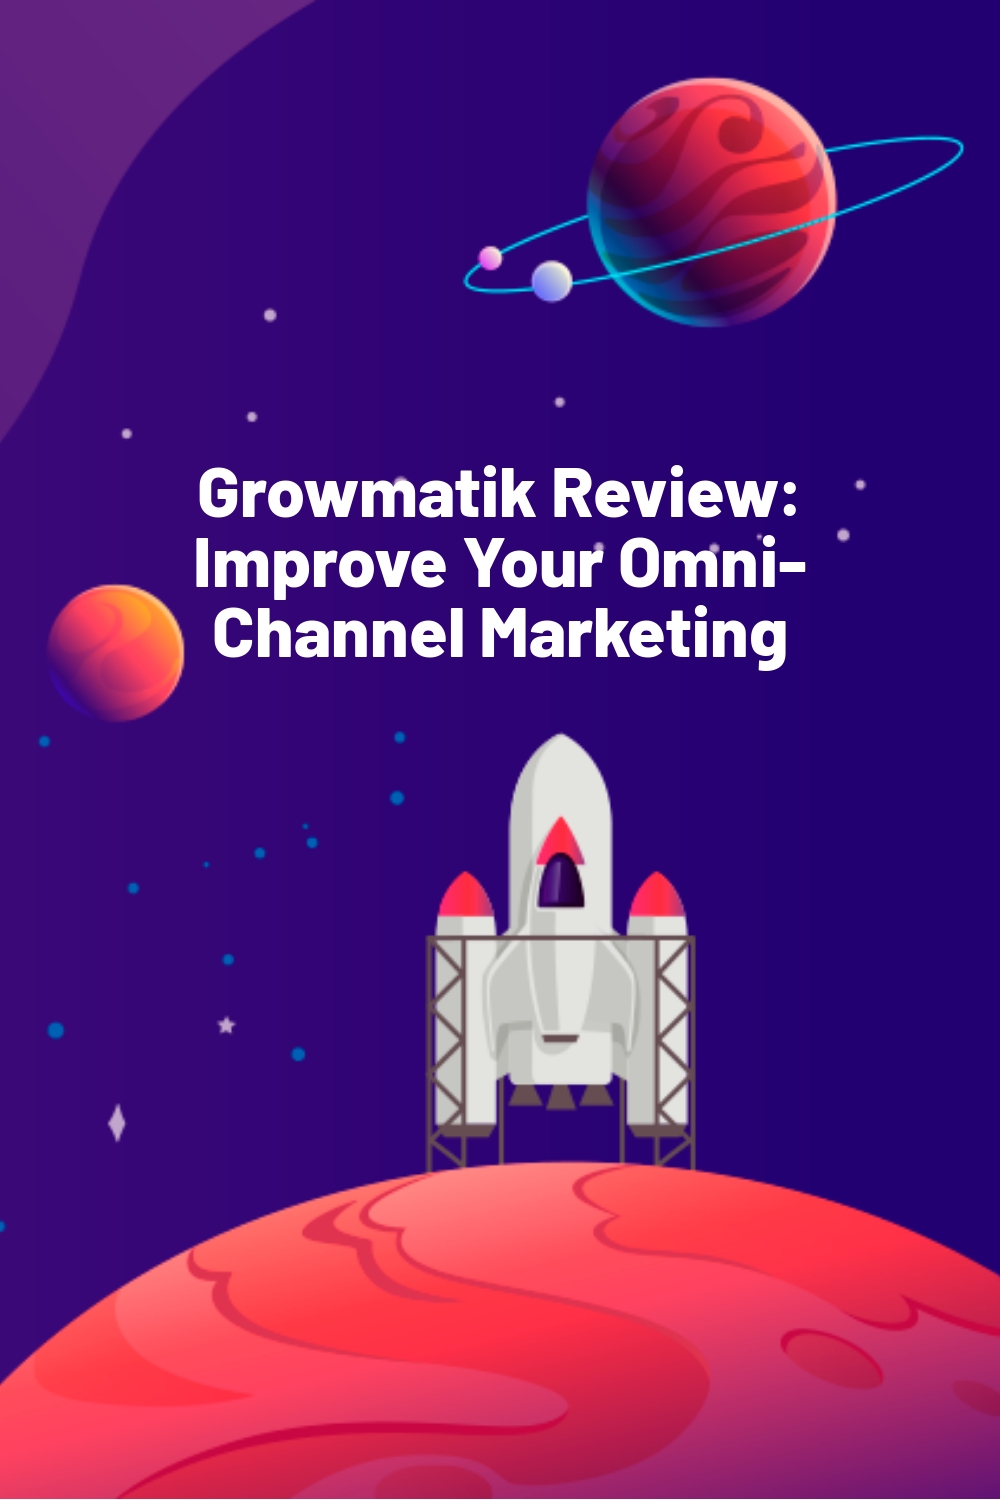 Growmatik Review: Improve Your Omni-Channel Marketing